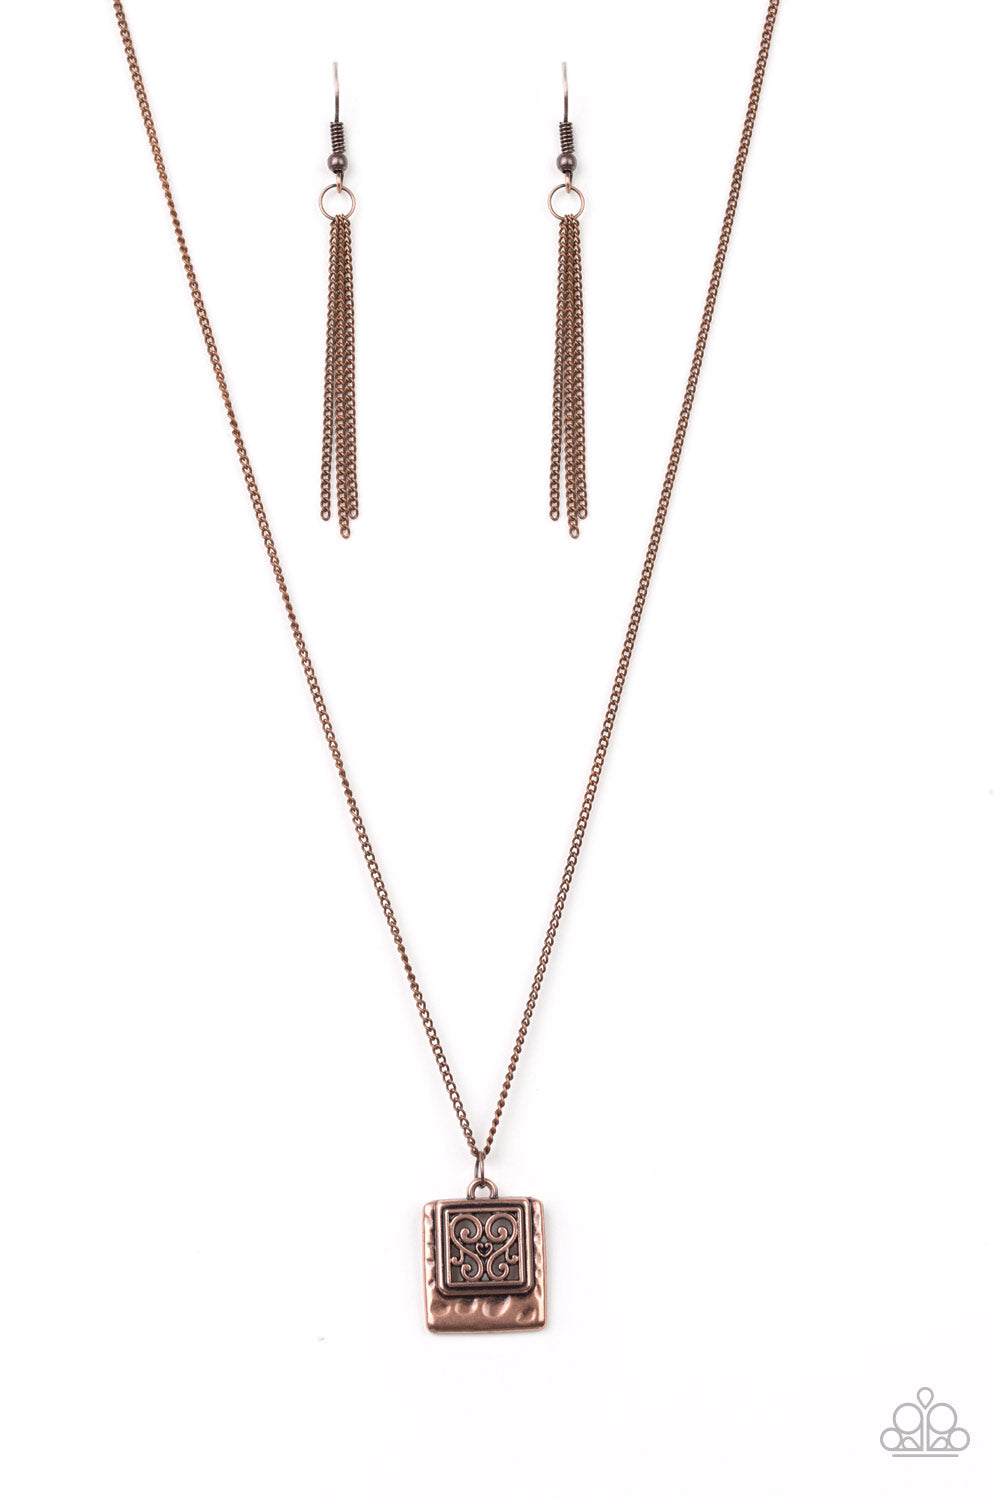 Back To Square One - Copper Necklace